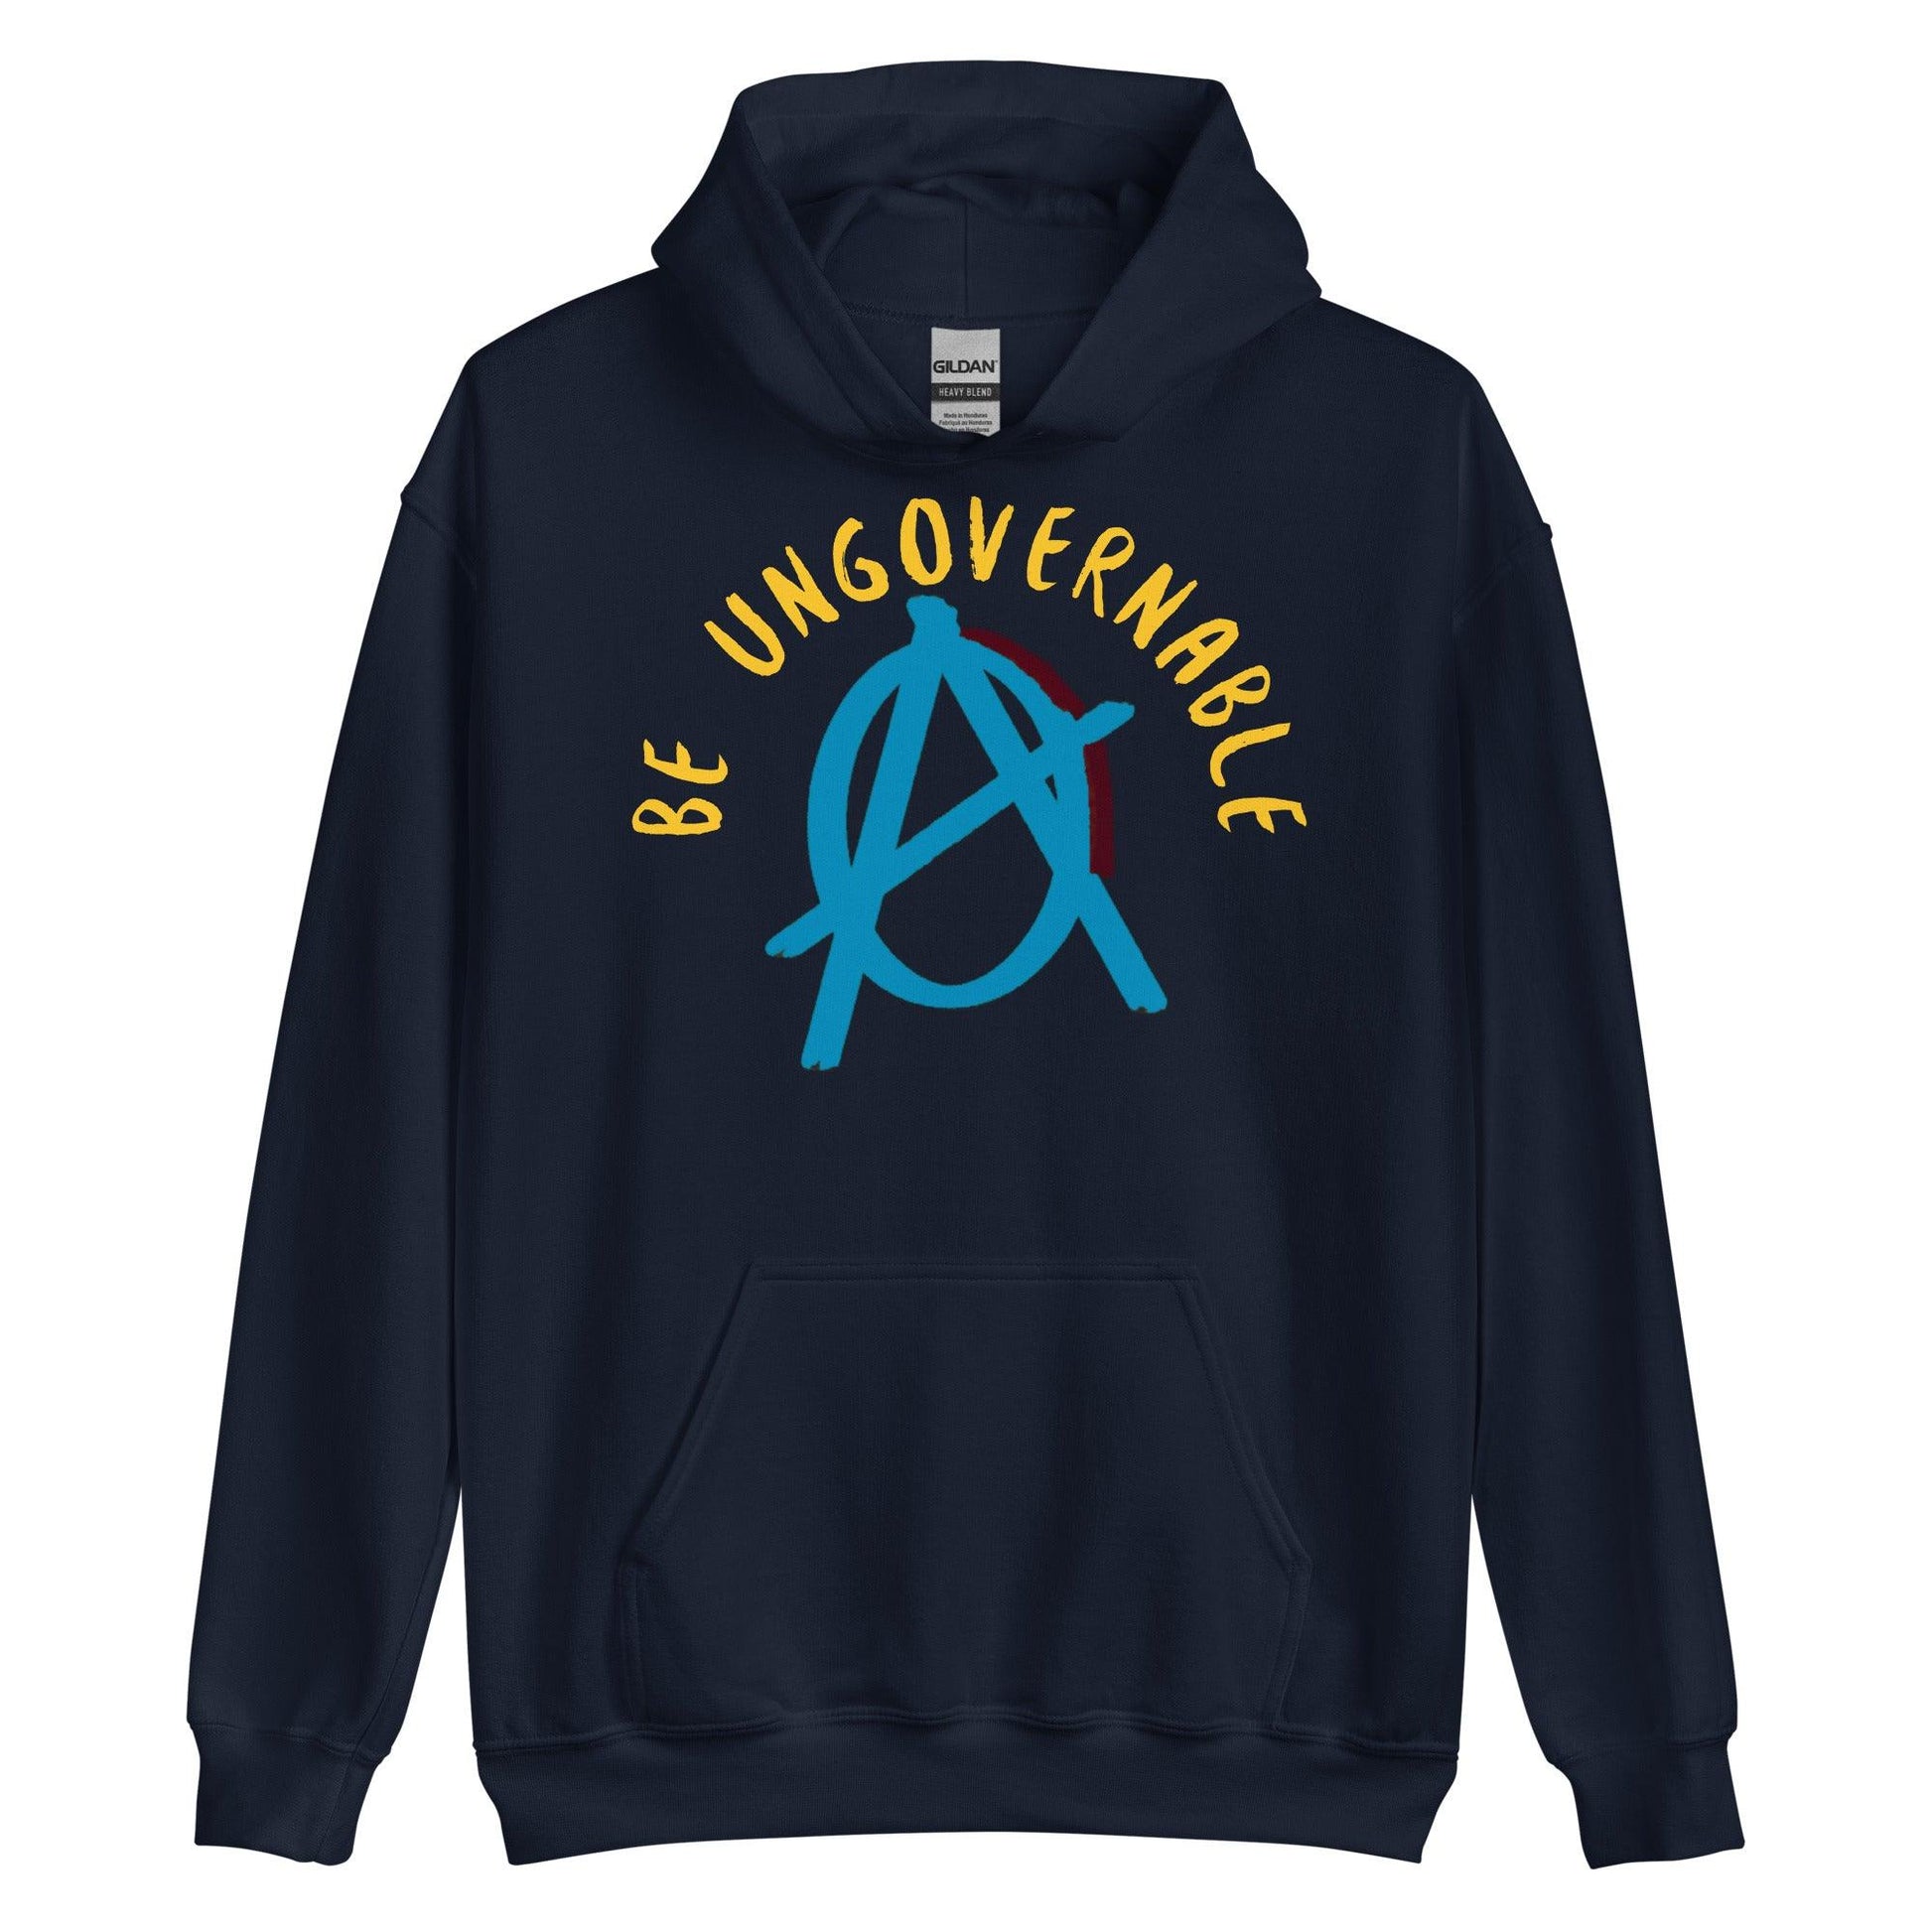 Anarchy Wear Blue "Be Ungovernable" Hoodie - AnarchyWear